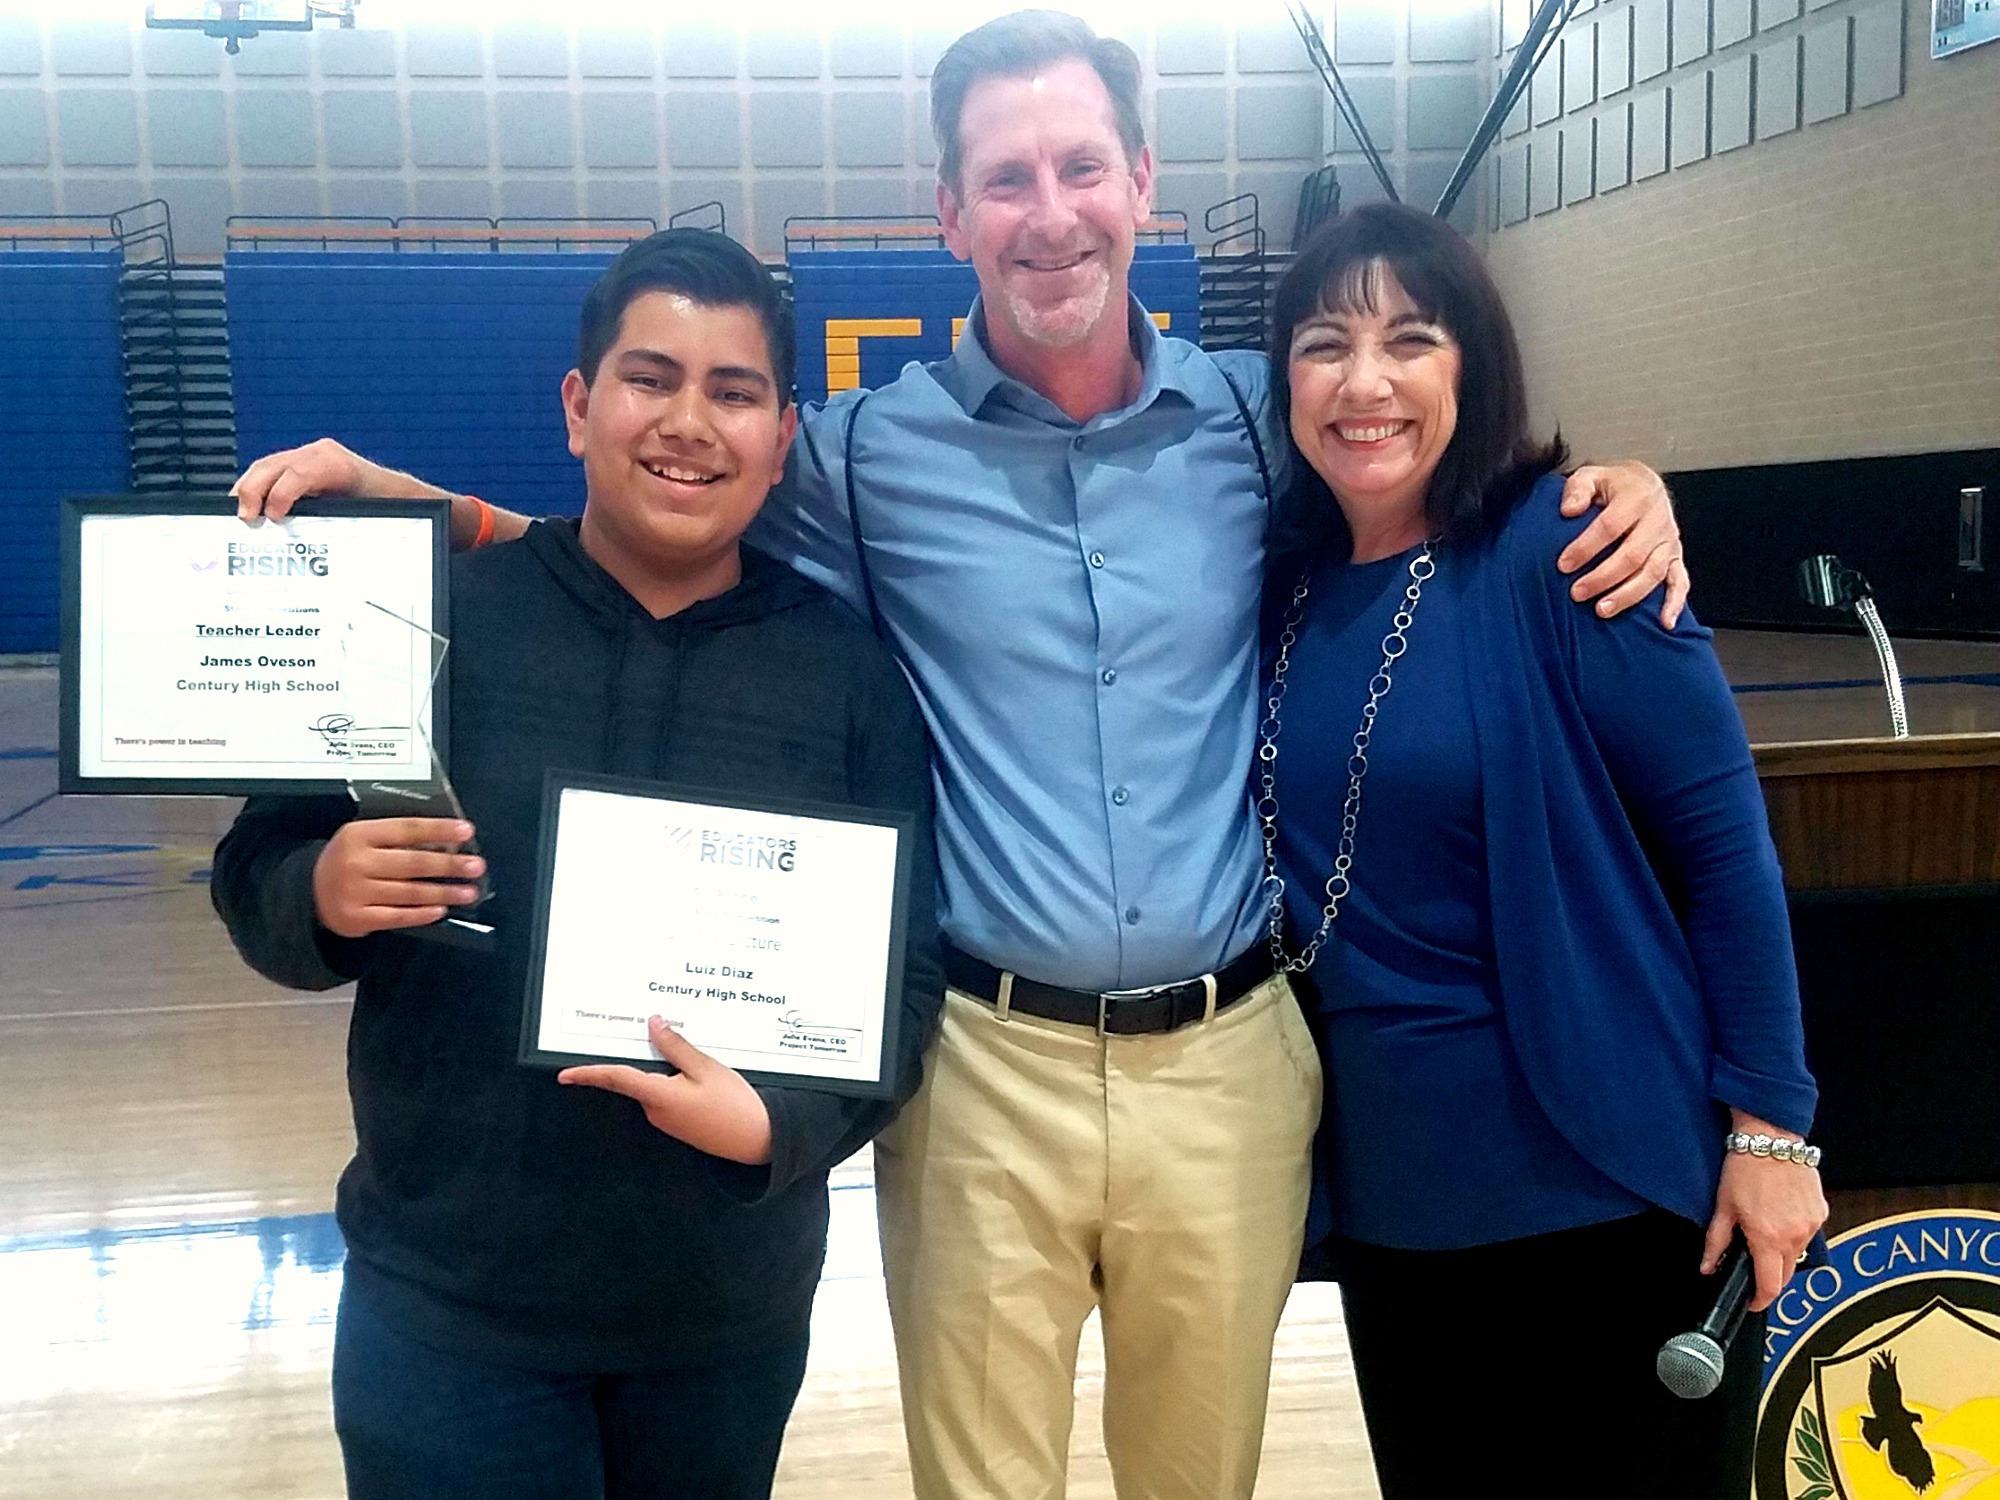 Project Tomorrow CEO Julie Evans presents Luis Diaz and Teacher Leader James Oveson with competition awards.